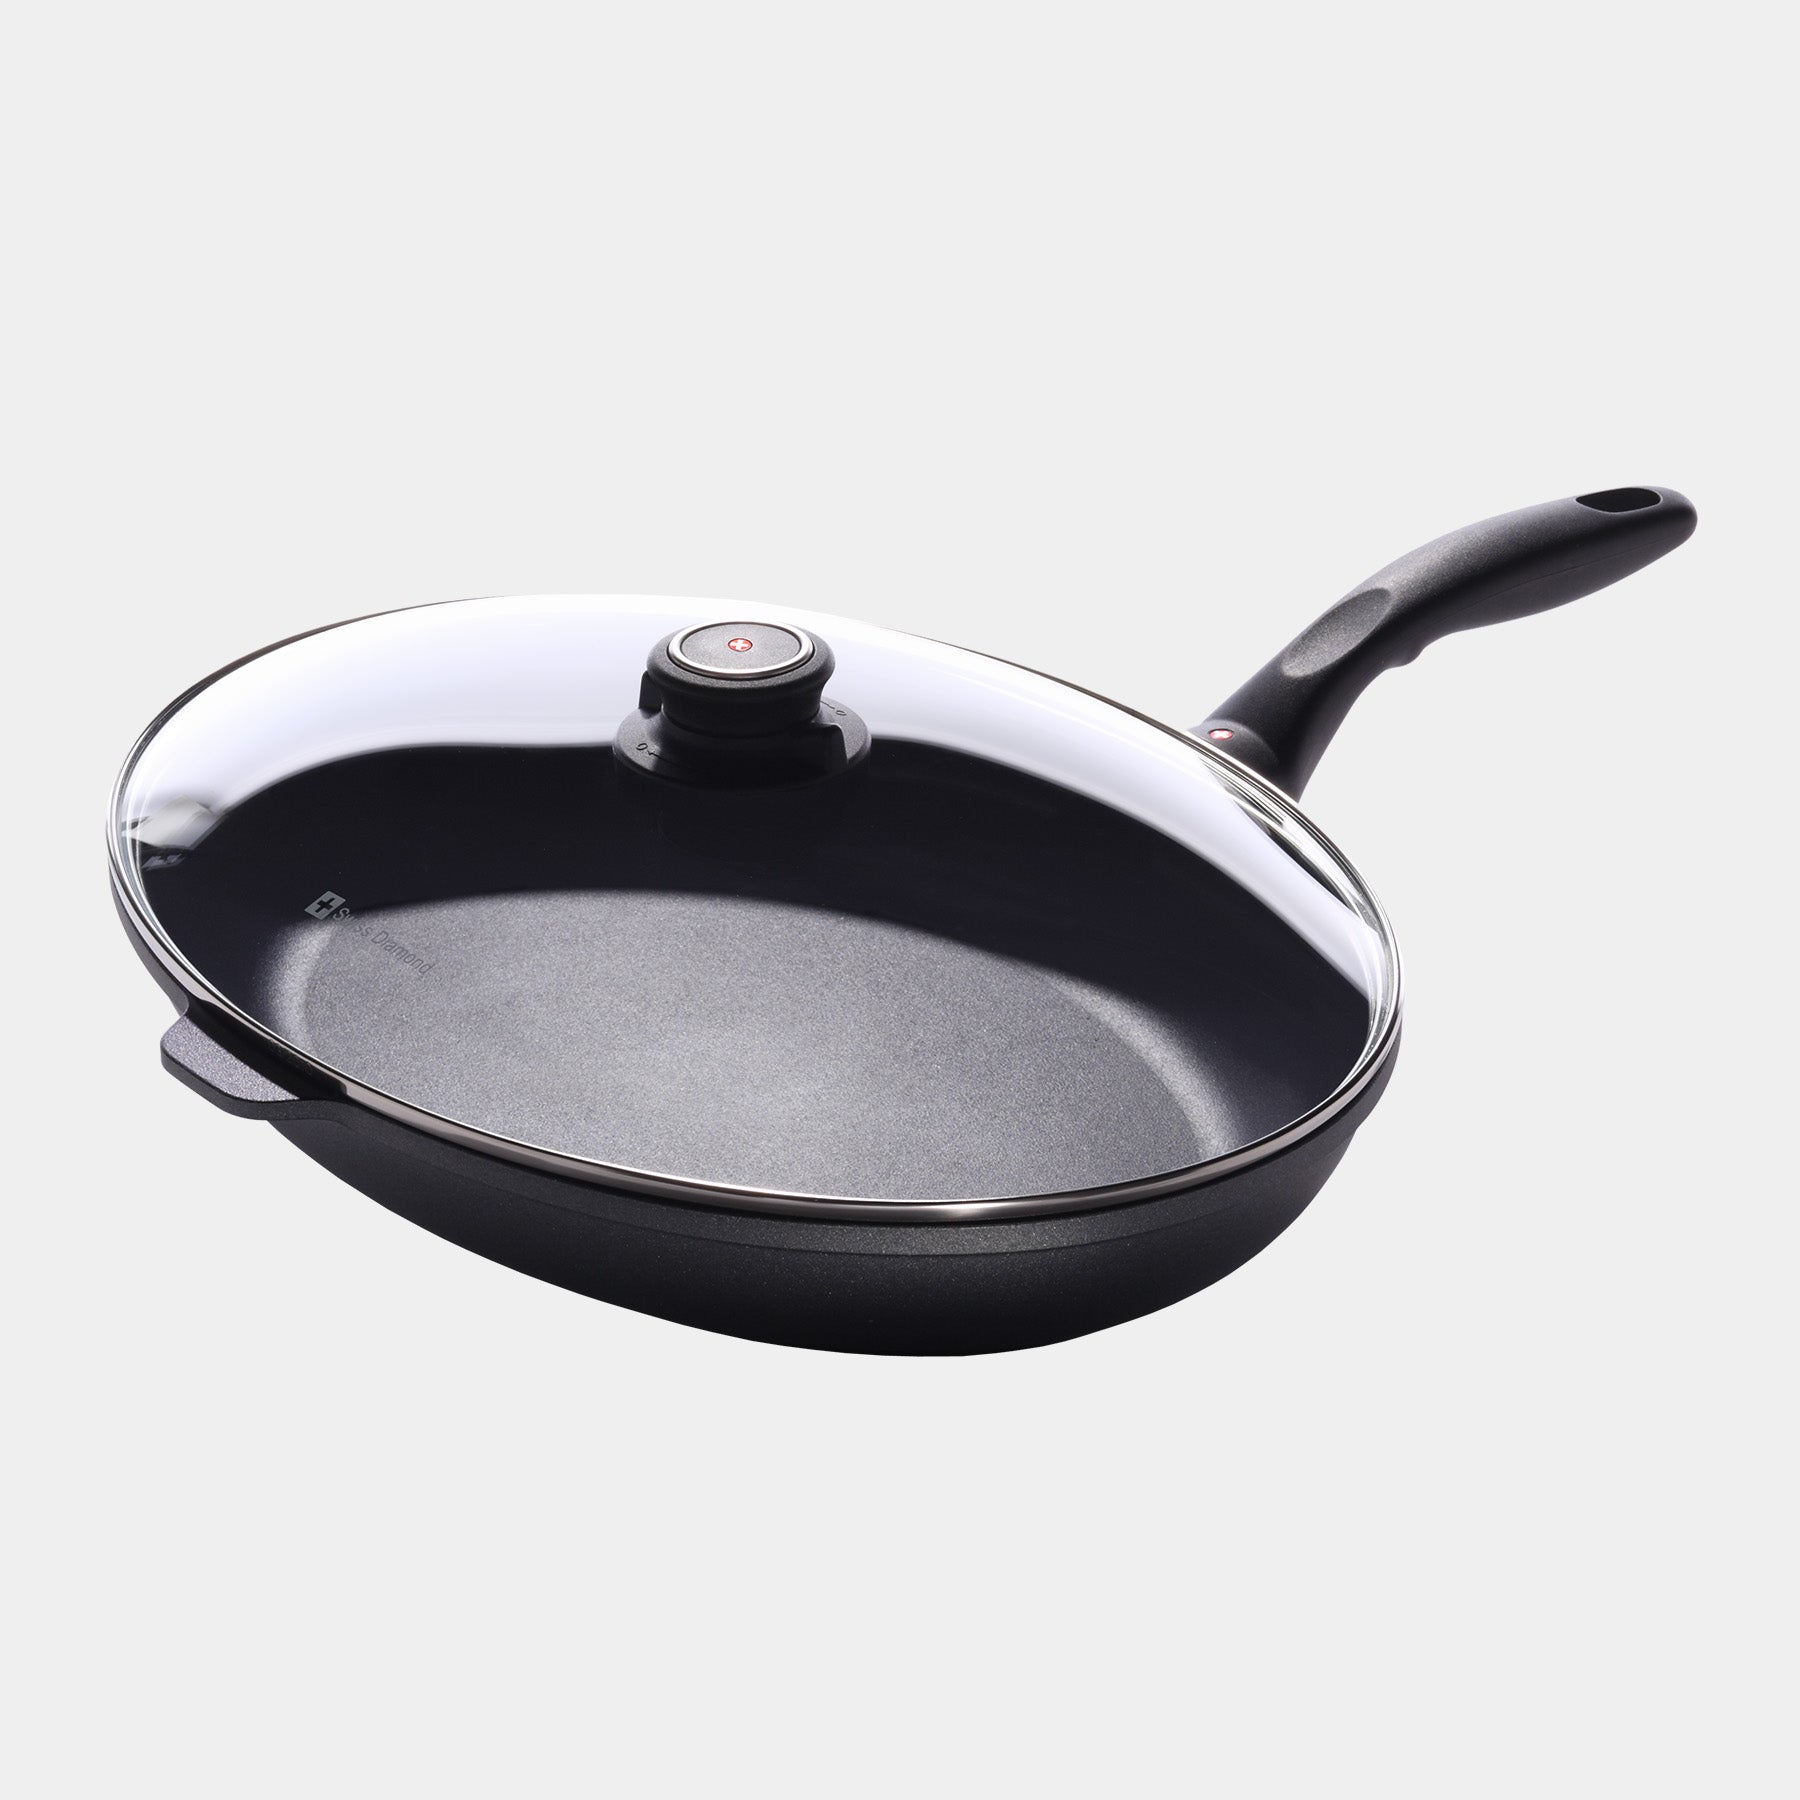 HD Nonstick Oval Fish Pan with Glass Lid